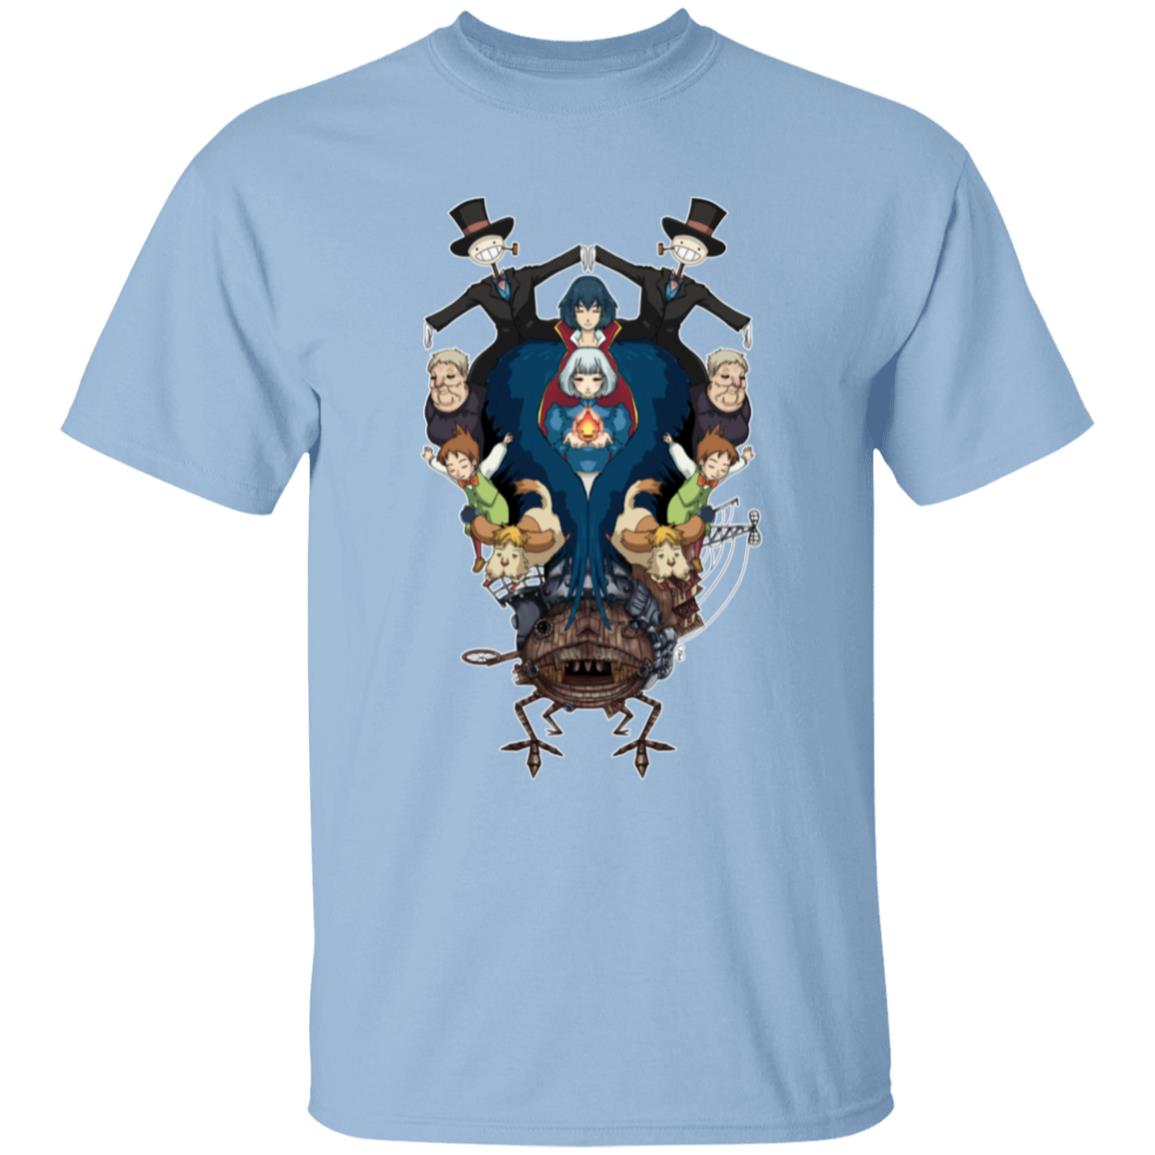 Howl’s Moving Castle Characters Mirror T Shirt for Kid Ghibli Store ghibli.store